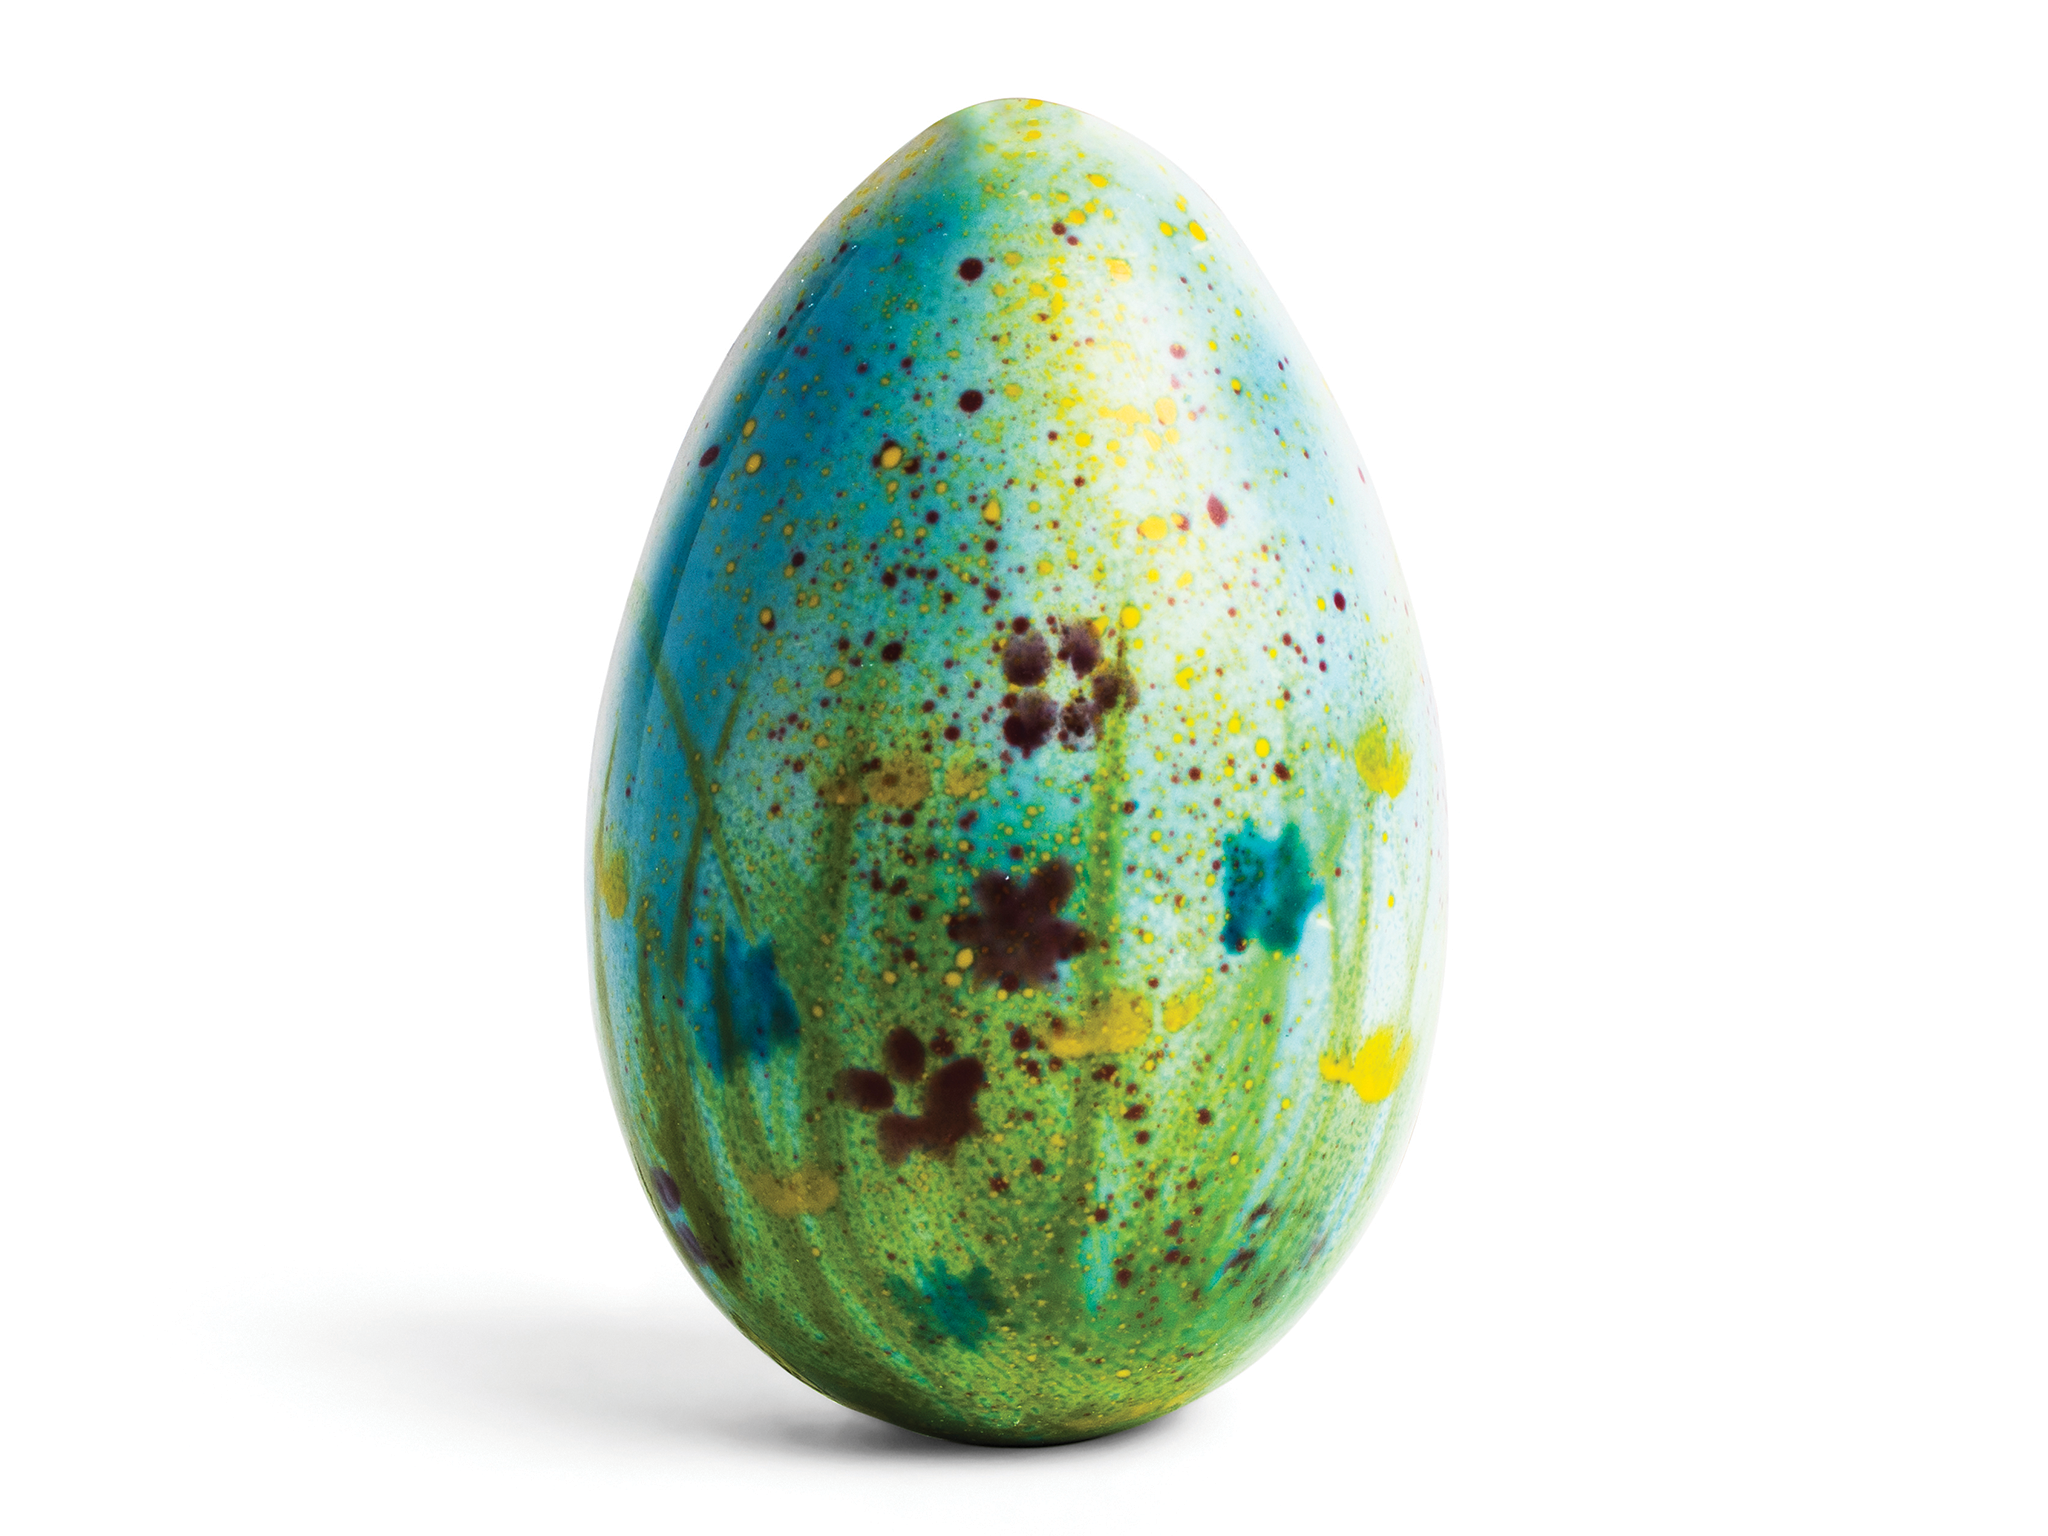 Daylesford hand-painted meadow easter egg